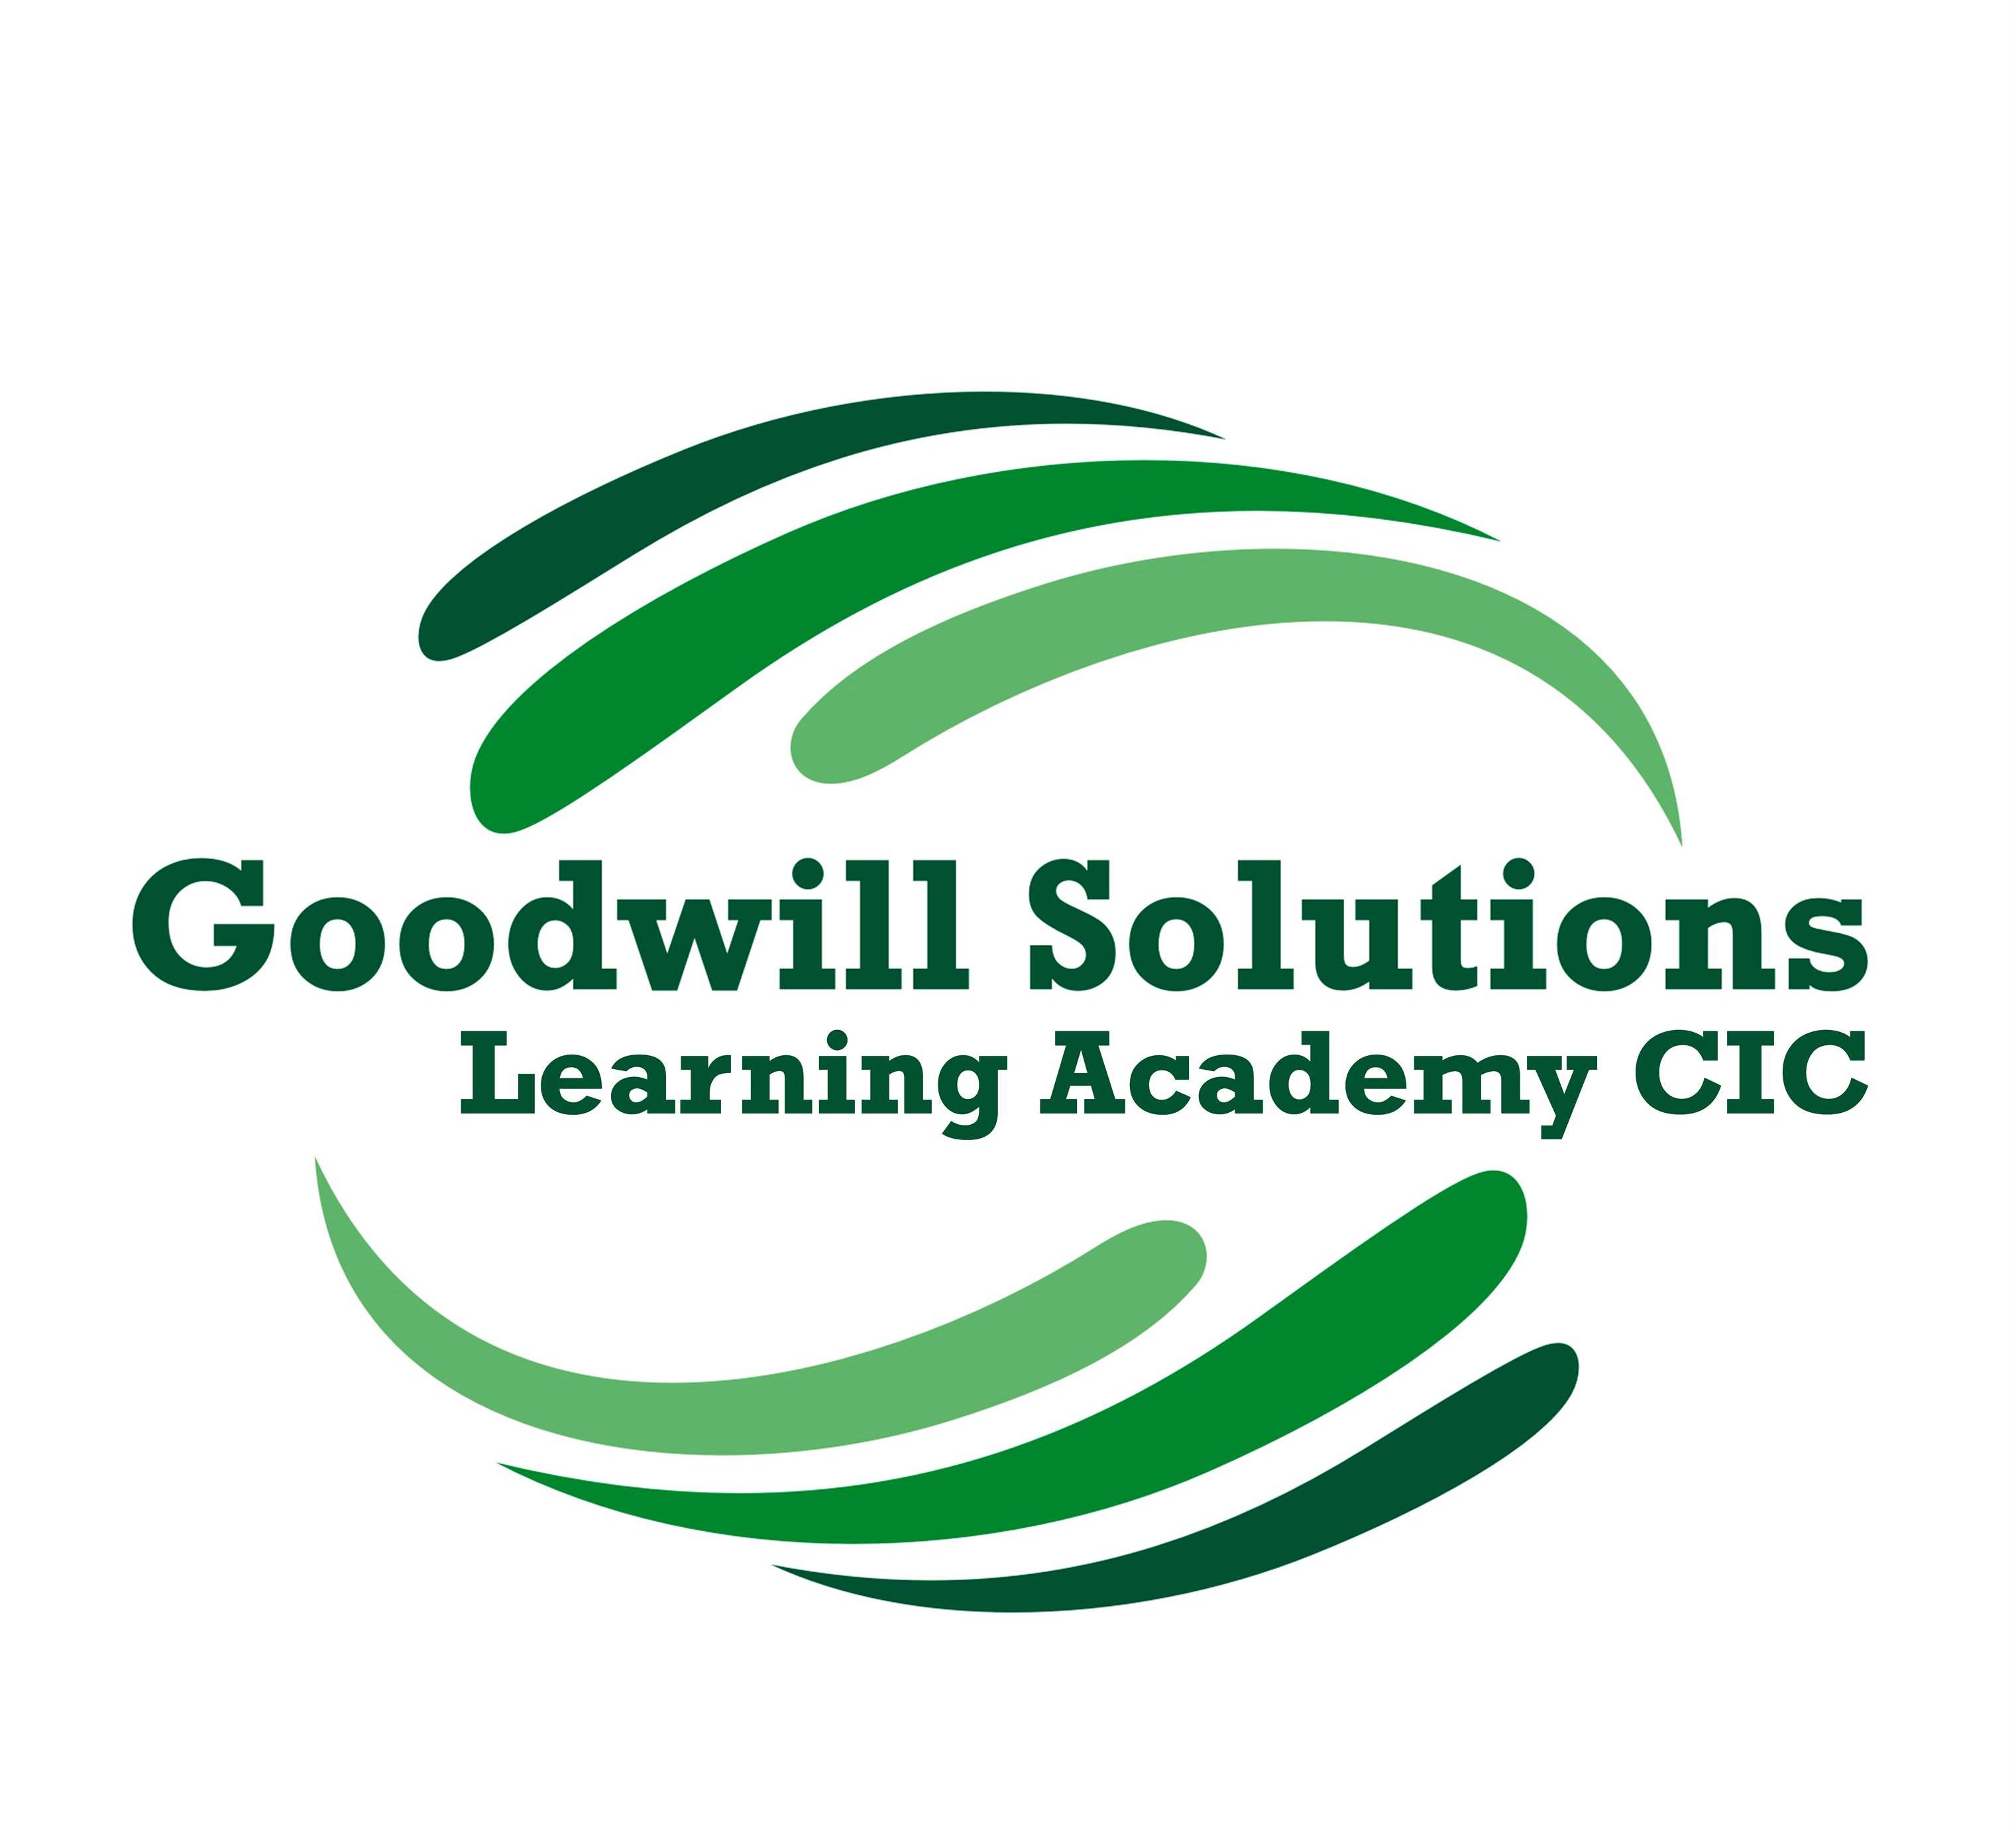 Goodwill Solutions Learning Academy CIC